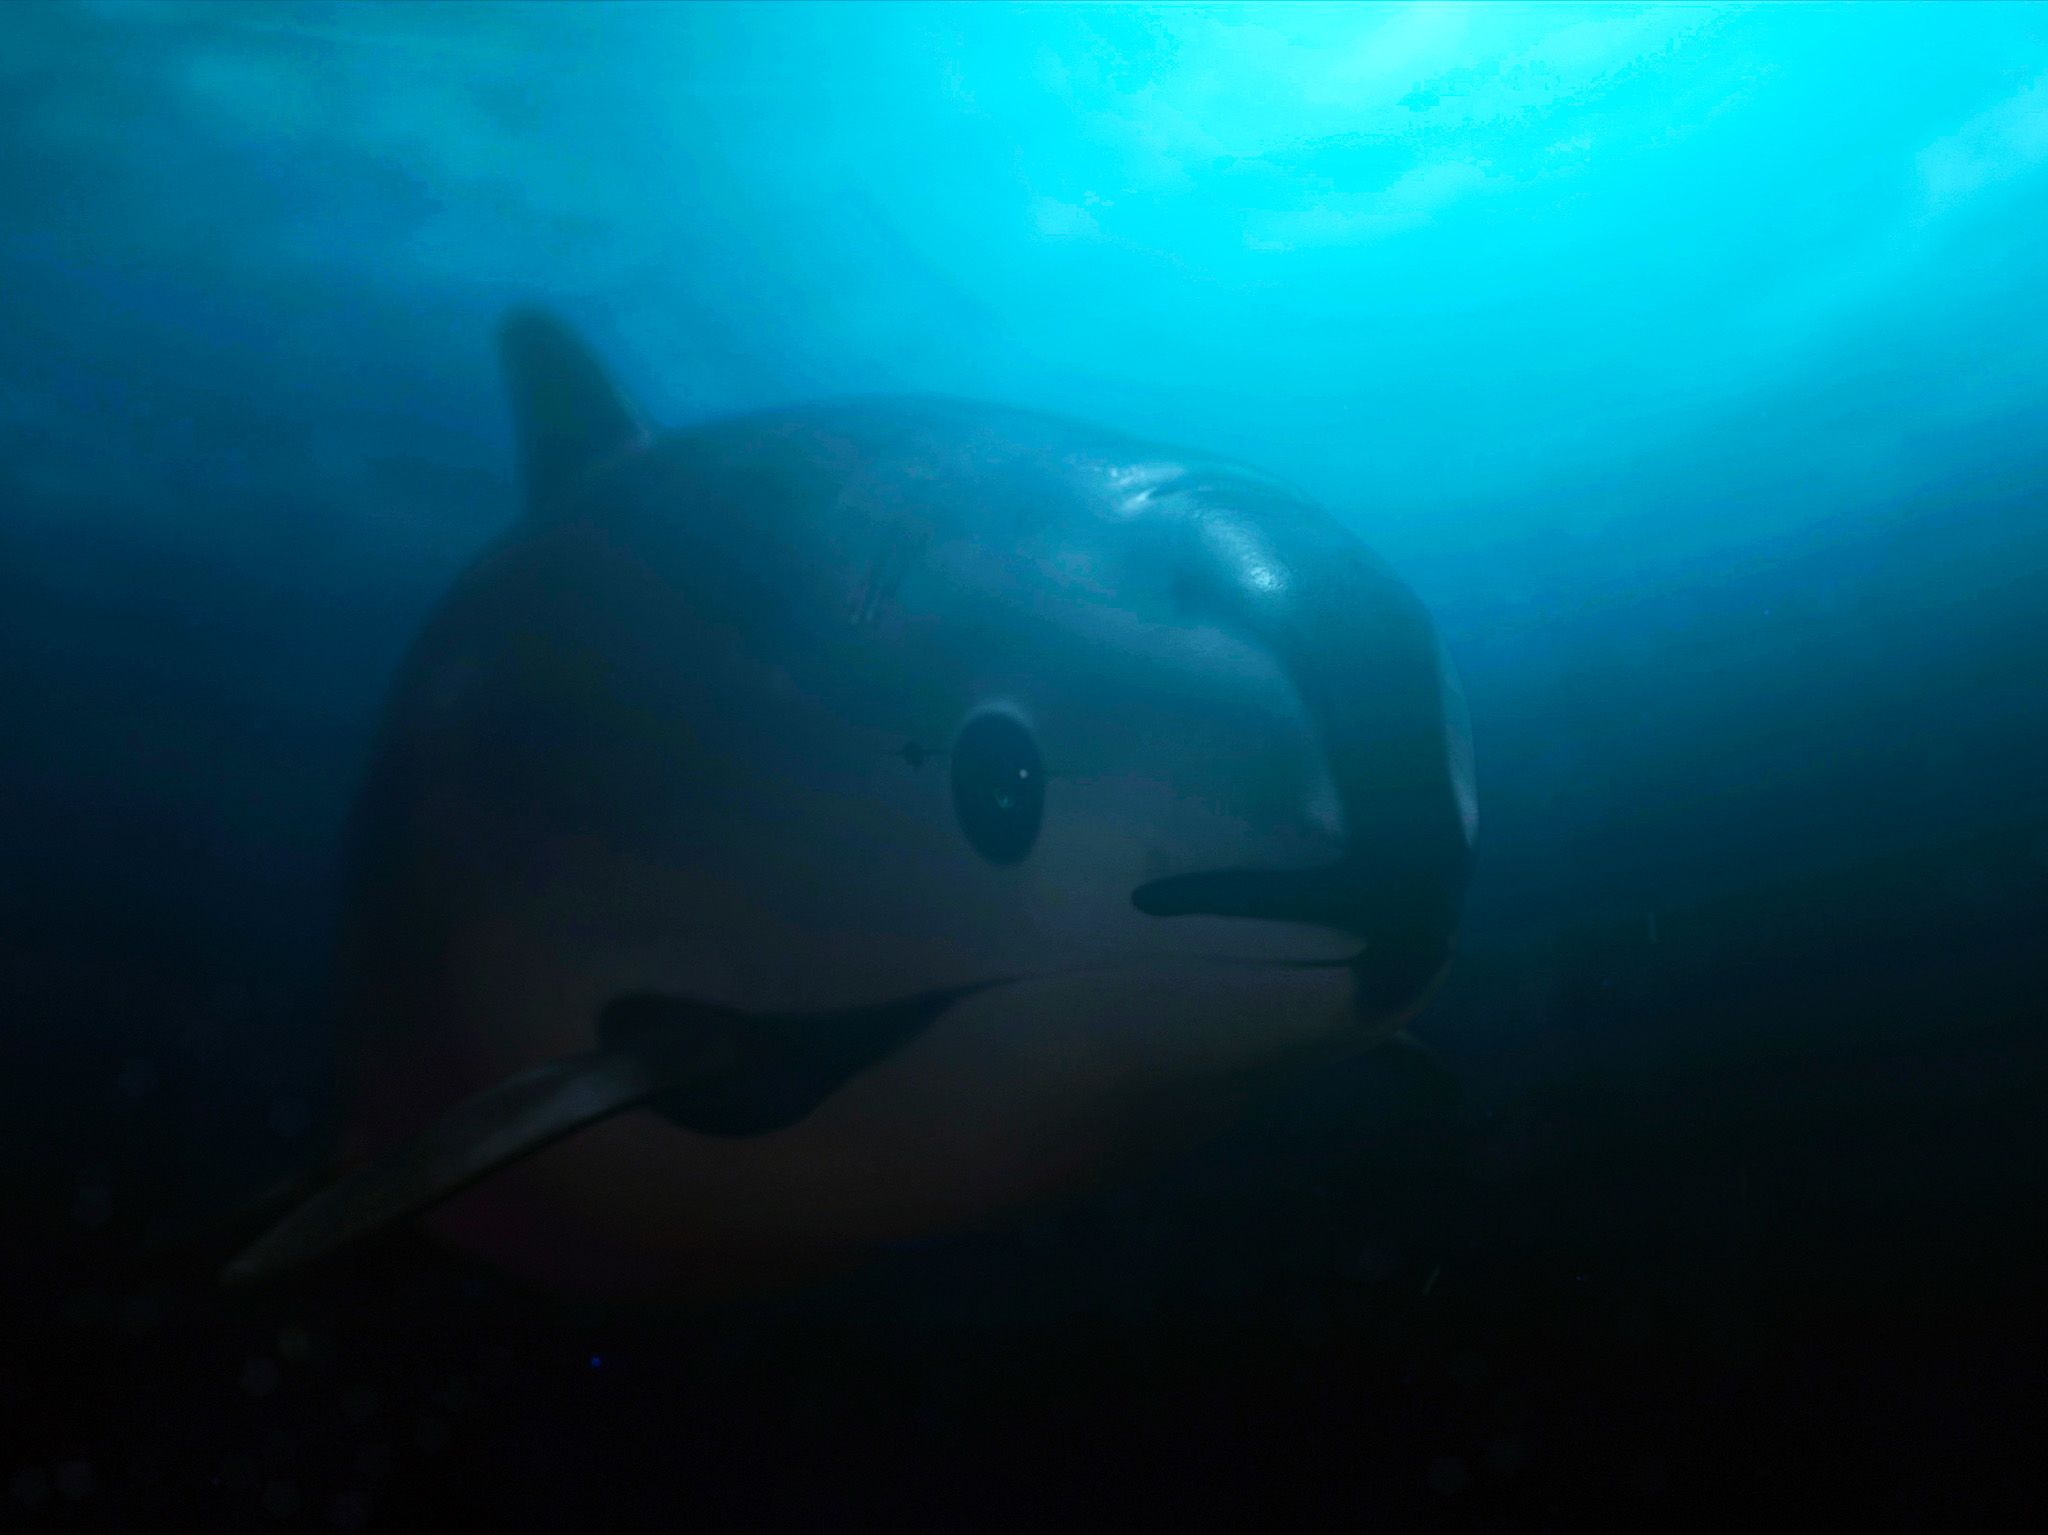 Vaquita underwater swimming. This image is from Sea of Shadows. [Photo of the day - November 2019]